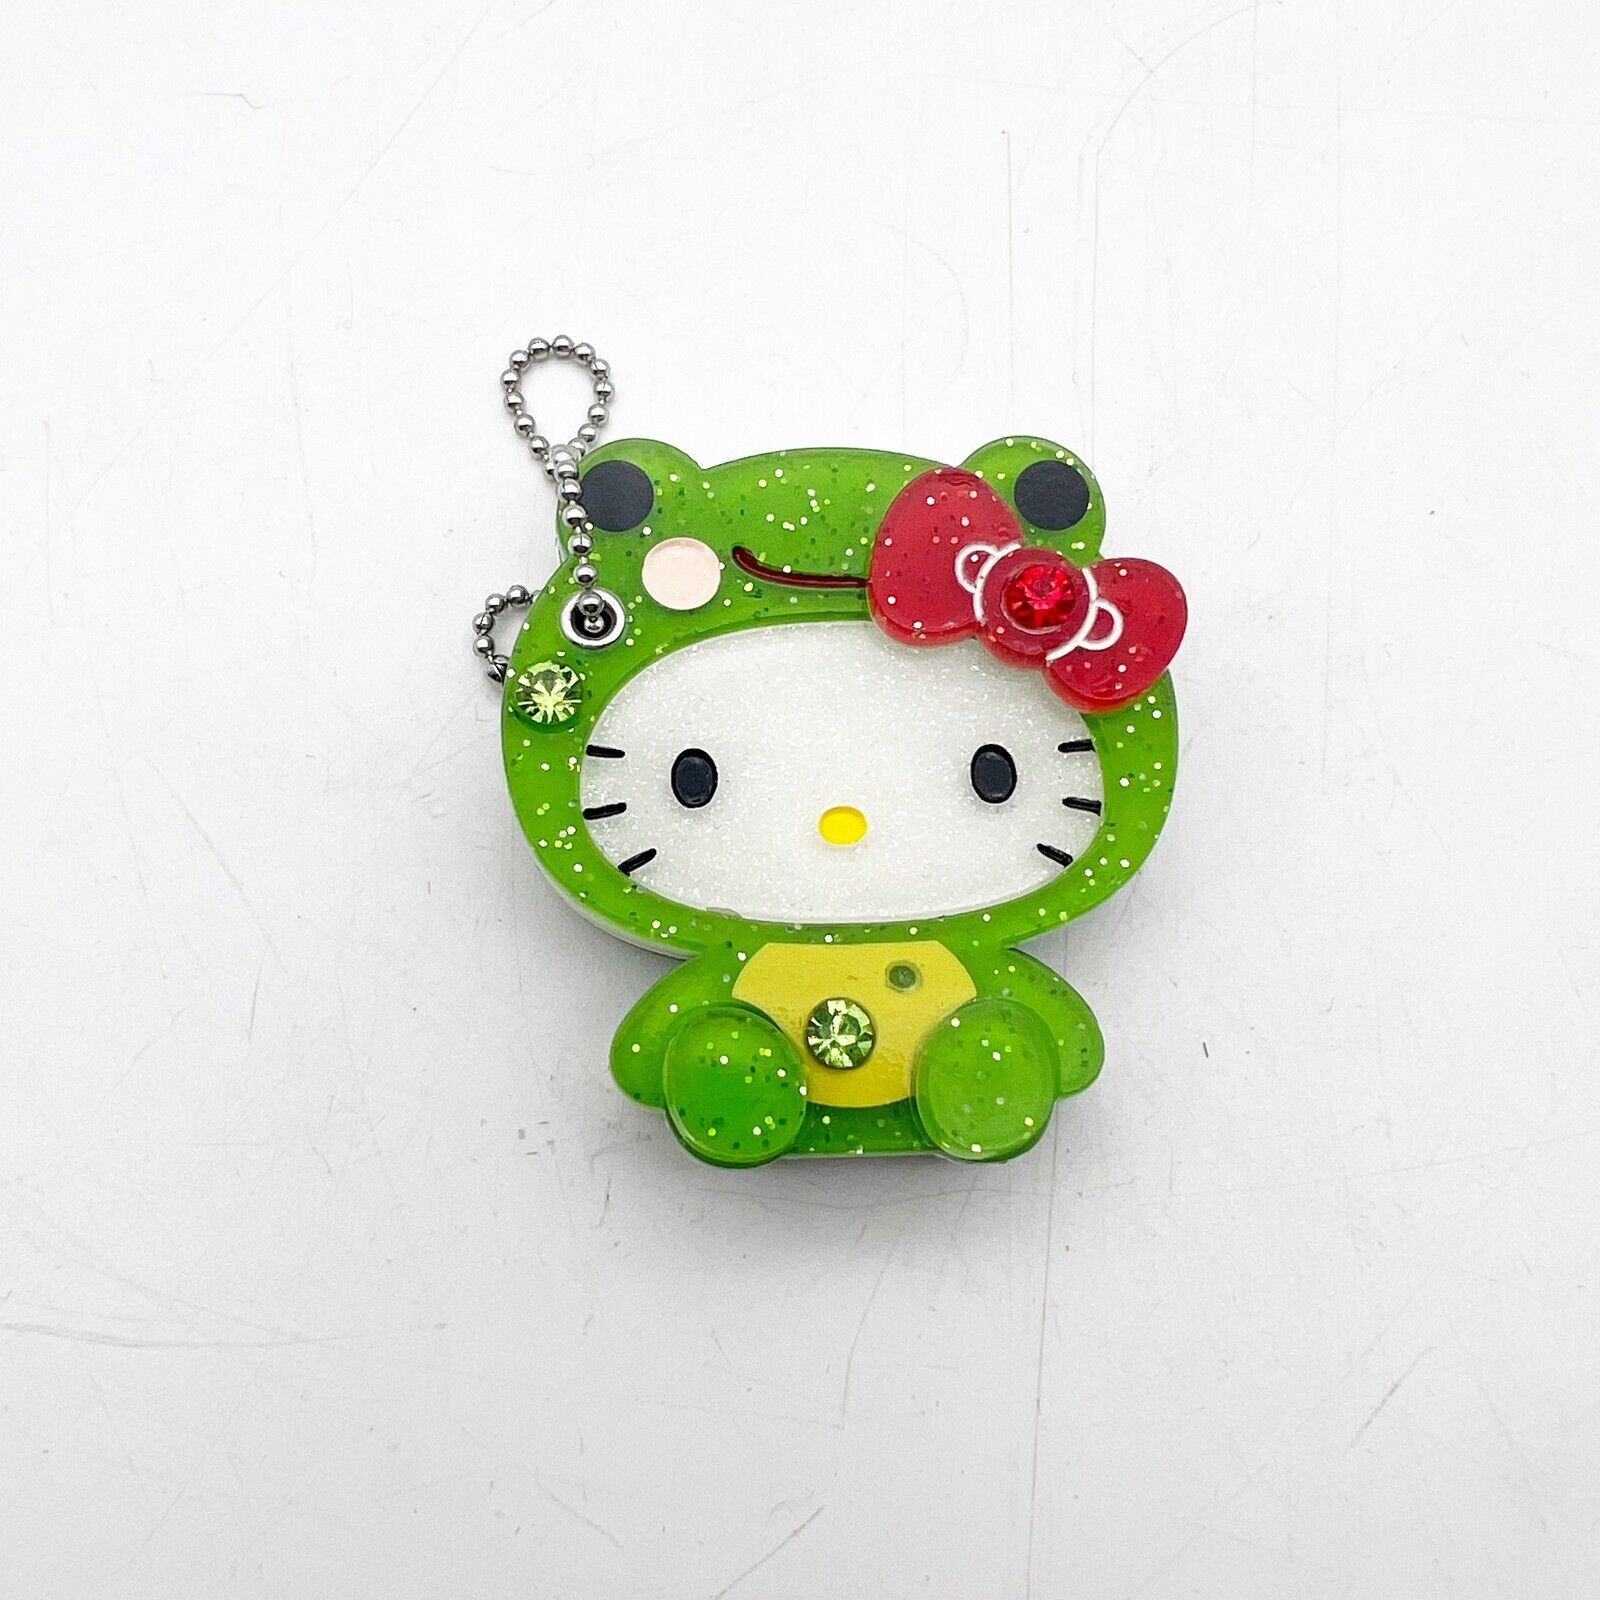 Sanrio Hello Kitty Retro Keychain Ring Frog Outfit 2011 - $64.99